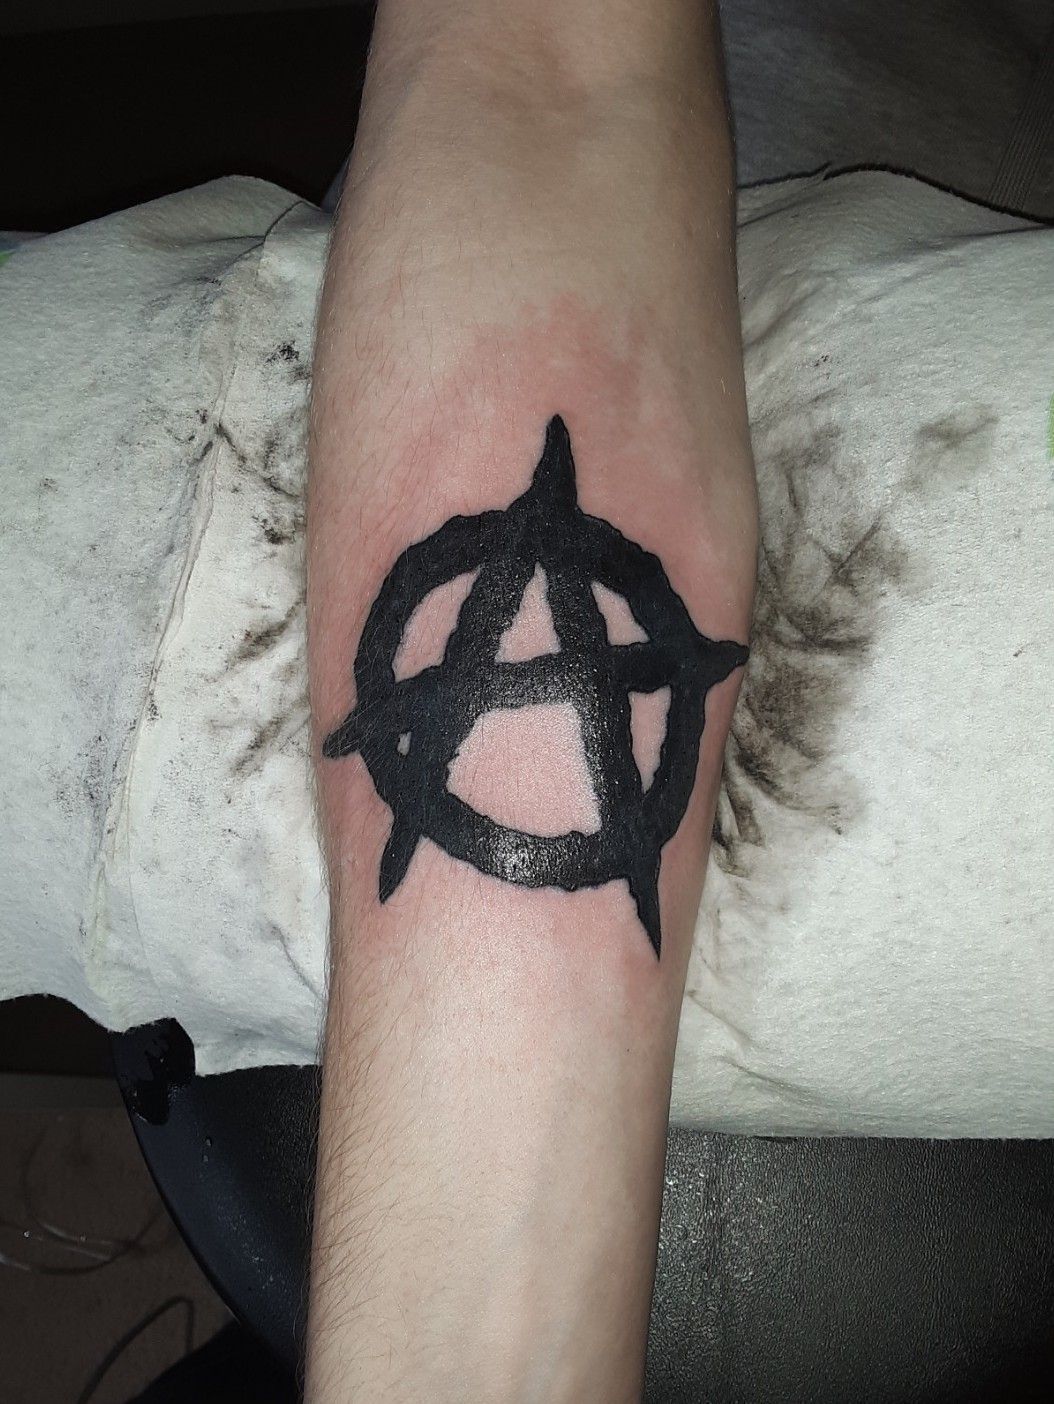 Tattoo of Anarchy Symbols Cover Up